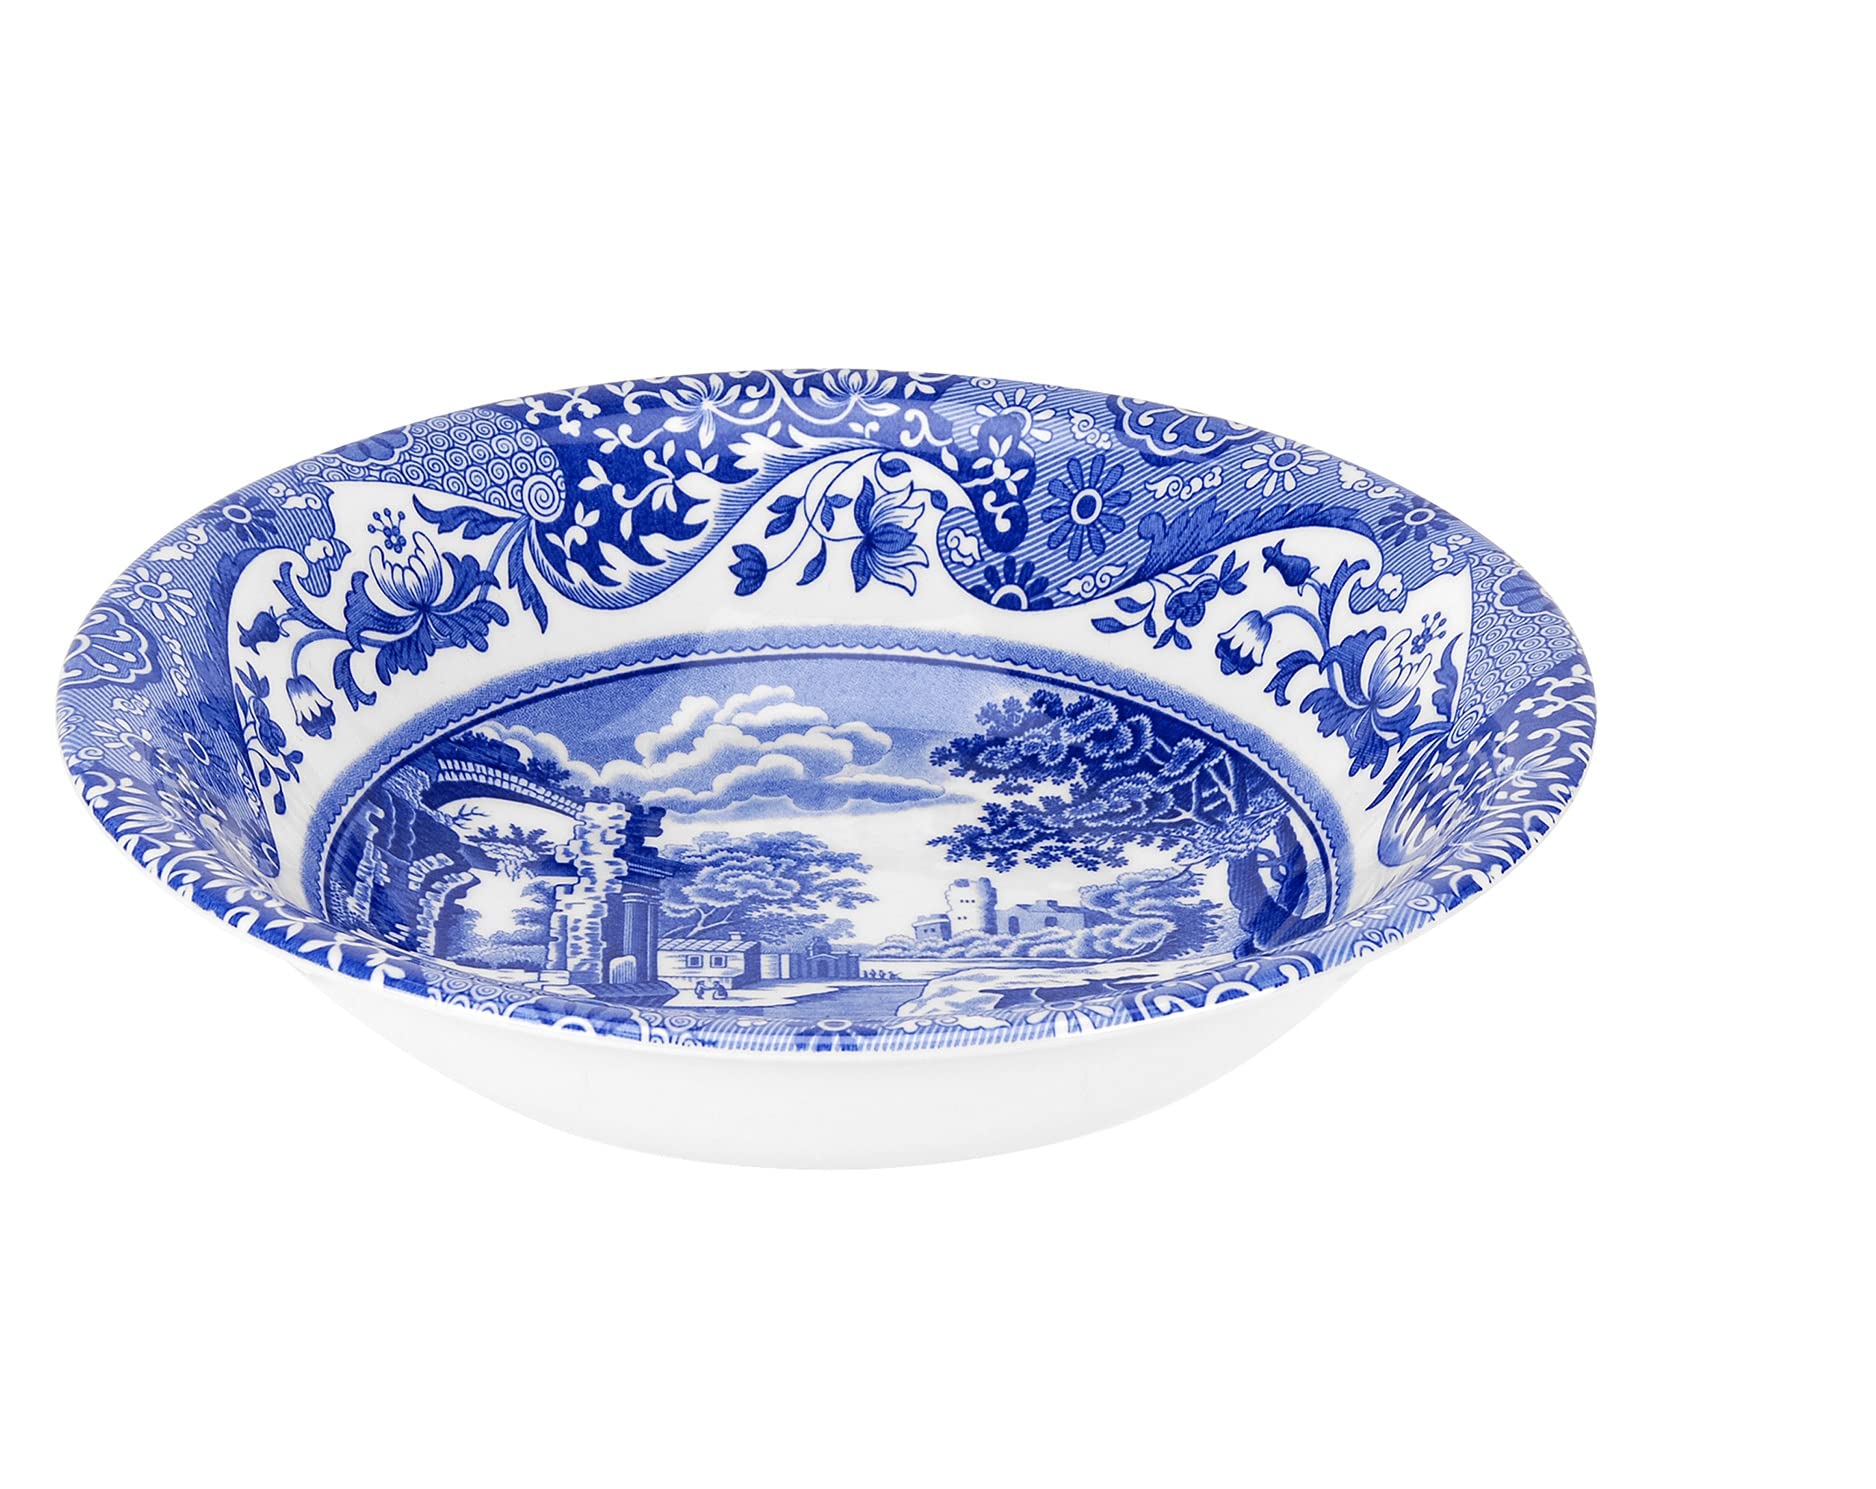 Spode Blue Italian Cereal Bowl | Set of 4 | Oatmeal, Cereal, and Rice Bowl | Made of Earthenware | 6.5-Inches | Dishwasher and Microwave Safe | Made in England